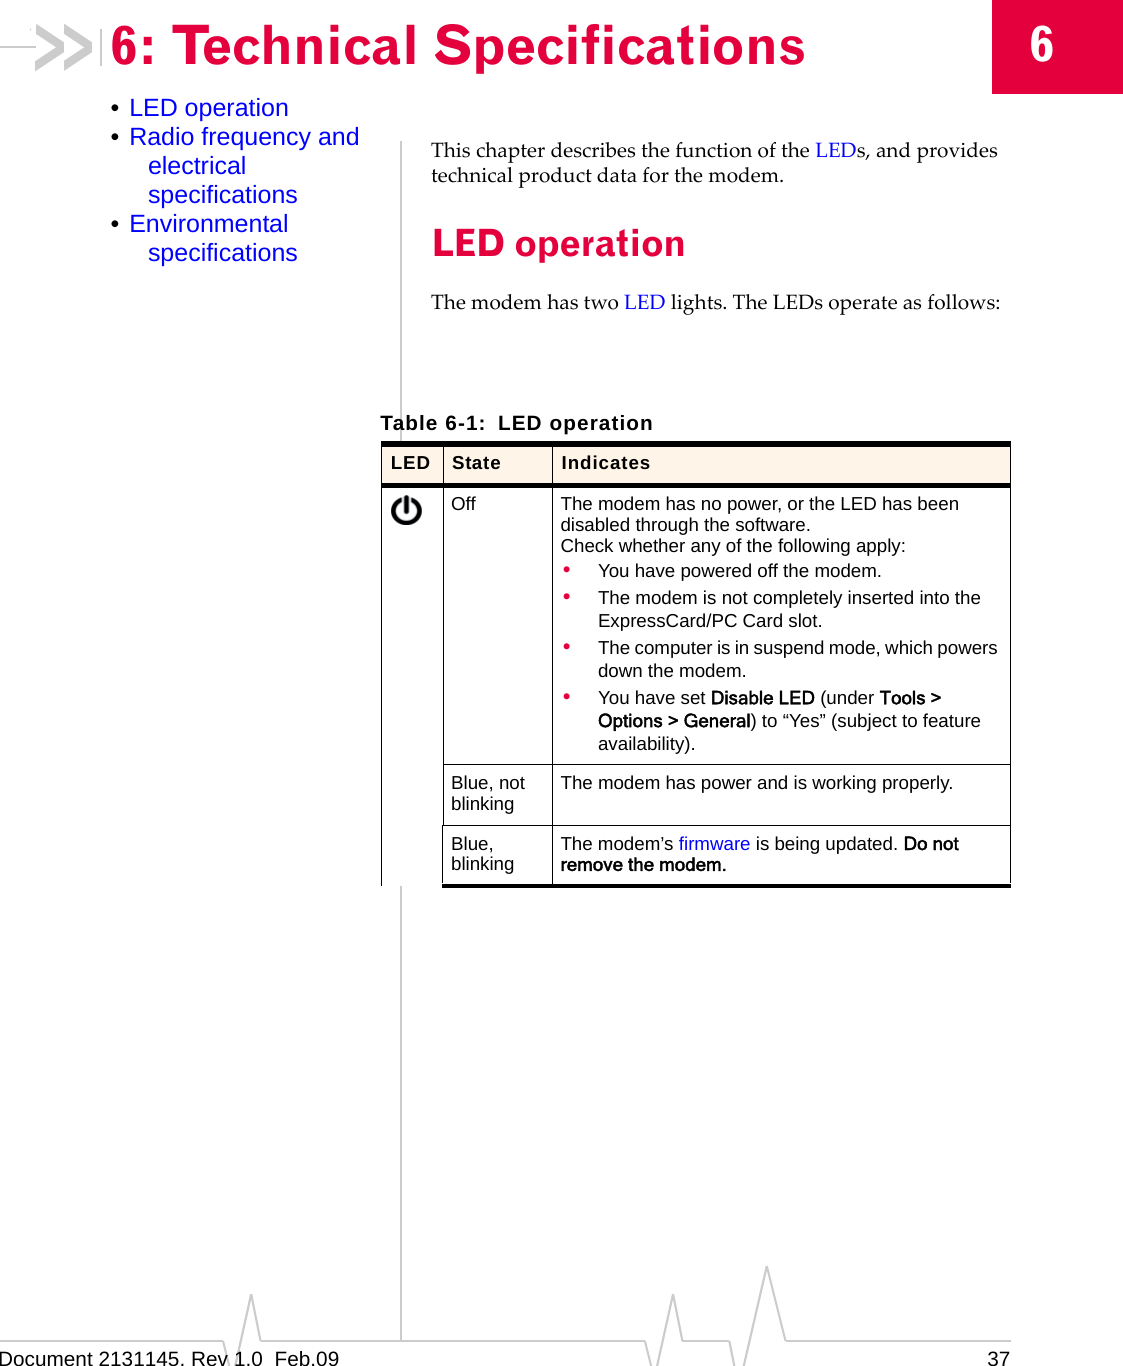 Document 2131145. Rev 1.0  Feb.09 3766: Technical Specifications•LED operation•Radio frequency and electrical specifications•Environmental specificationsThischapterdescribesthefunctionoftheLEDs,andprovidestechnicalproductdataforthemodem.LED operationThemodemhastwoLEDlights.TheLEDsoperateasfollows:Table 6-1: LED operationLED State IndicatesOff The modem has no power, or the LED has been disabled through the software.Check whether any of the following apply:•You have powered off the modem.•The modem is not completely inserted into the ExpressCard/PC Card slot.•The computer is in suspend mode, which powers down the modem.•You have set Disable LED (under Tools &gt; Options &gt; General) to “Yes” (subject to feature availability).Blue, not blinking The modem has power and is working properly.Blue, blinking The modem’s firmware is being updated. Do not remove the modem.